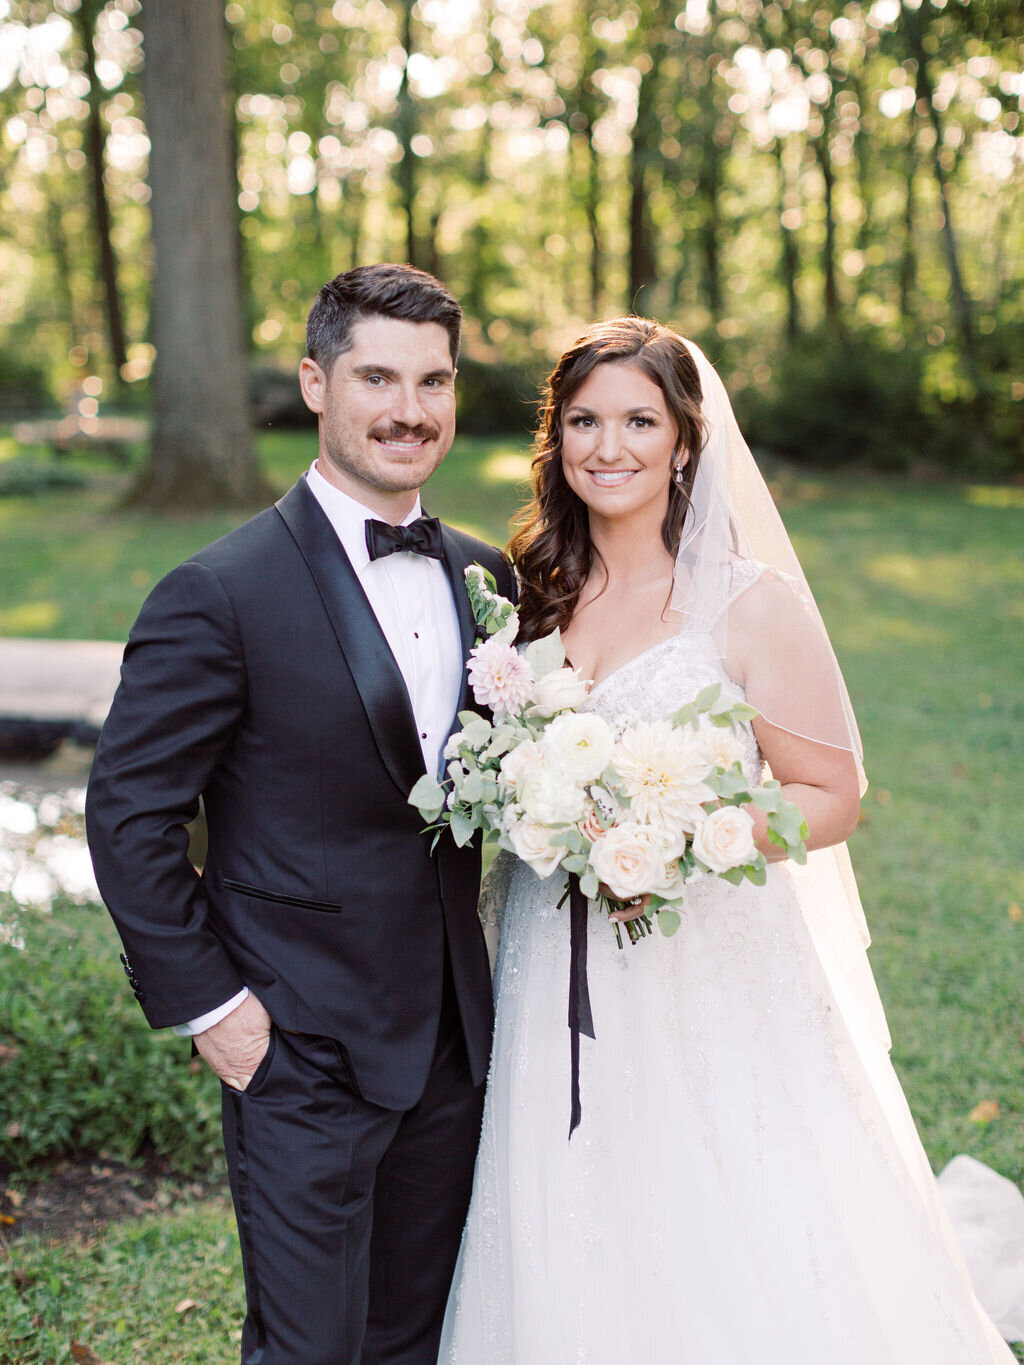 Kate Campbell Floral Fall Wedding Liriodendron Mansion by Molly Litchen21